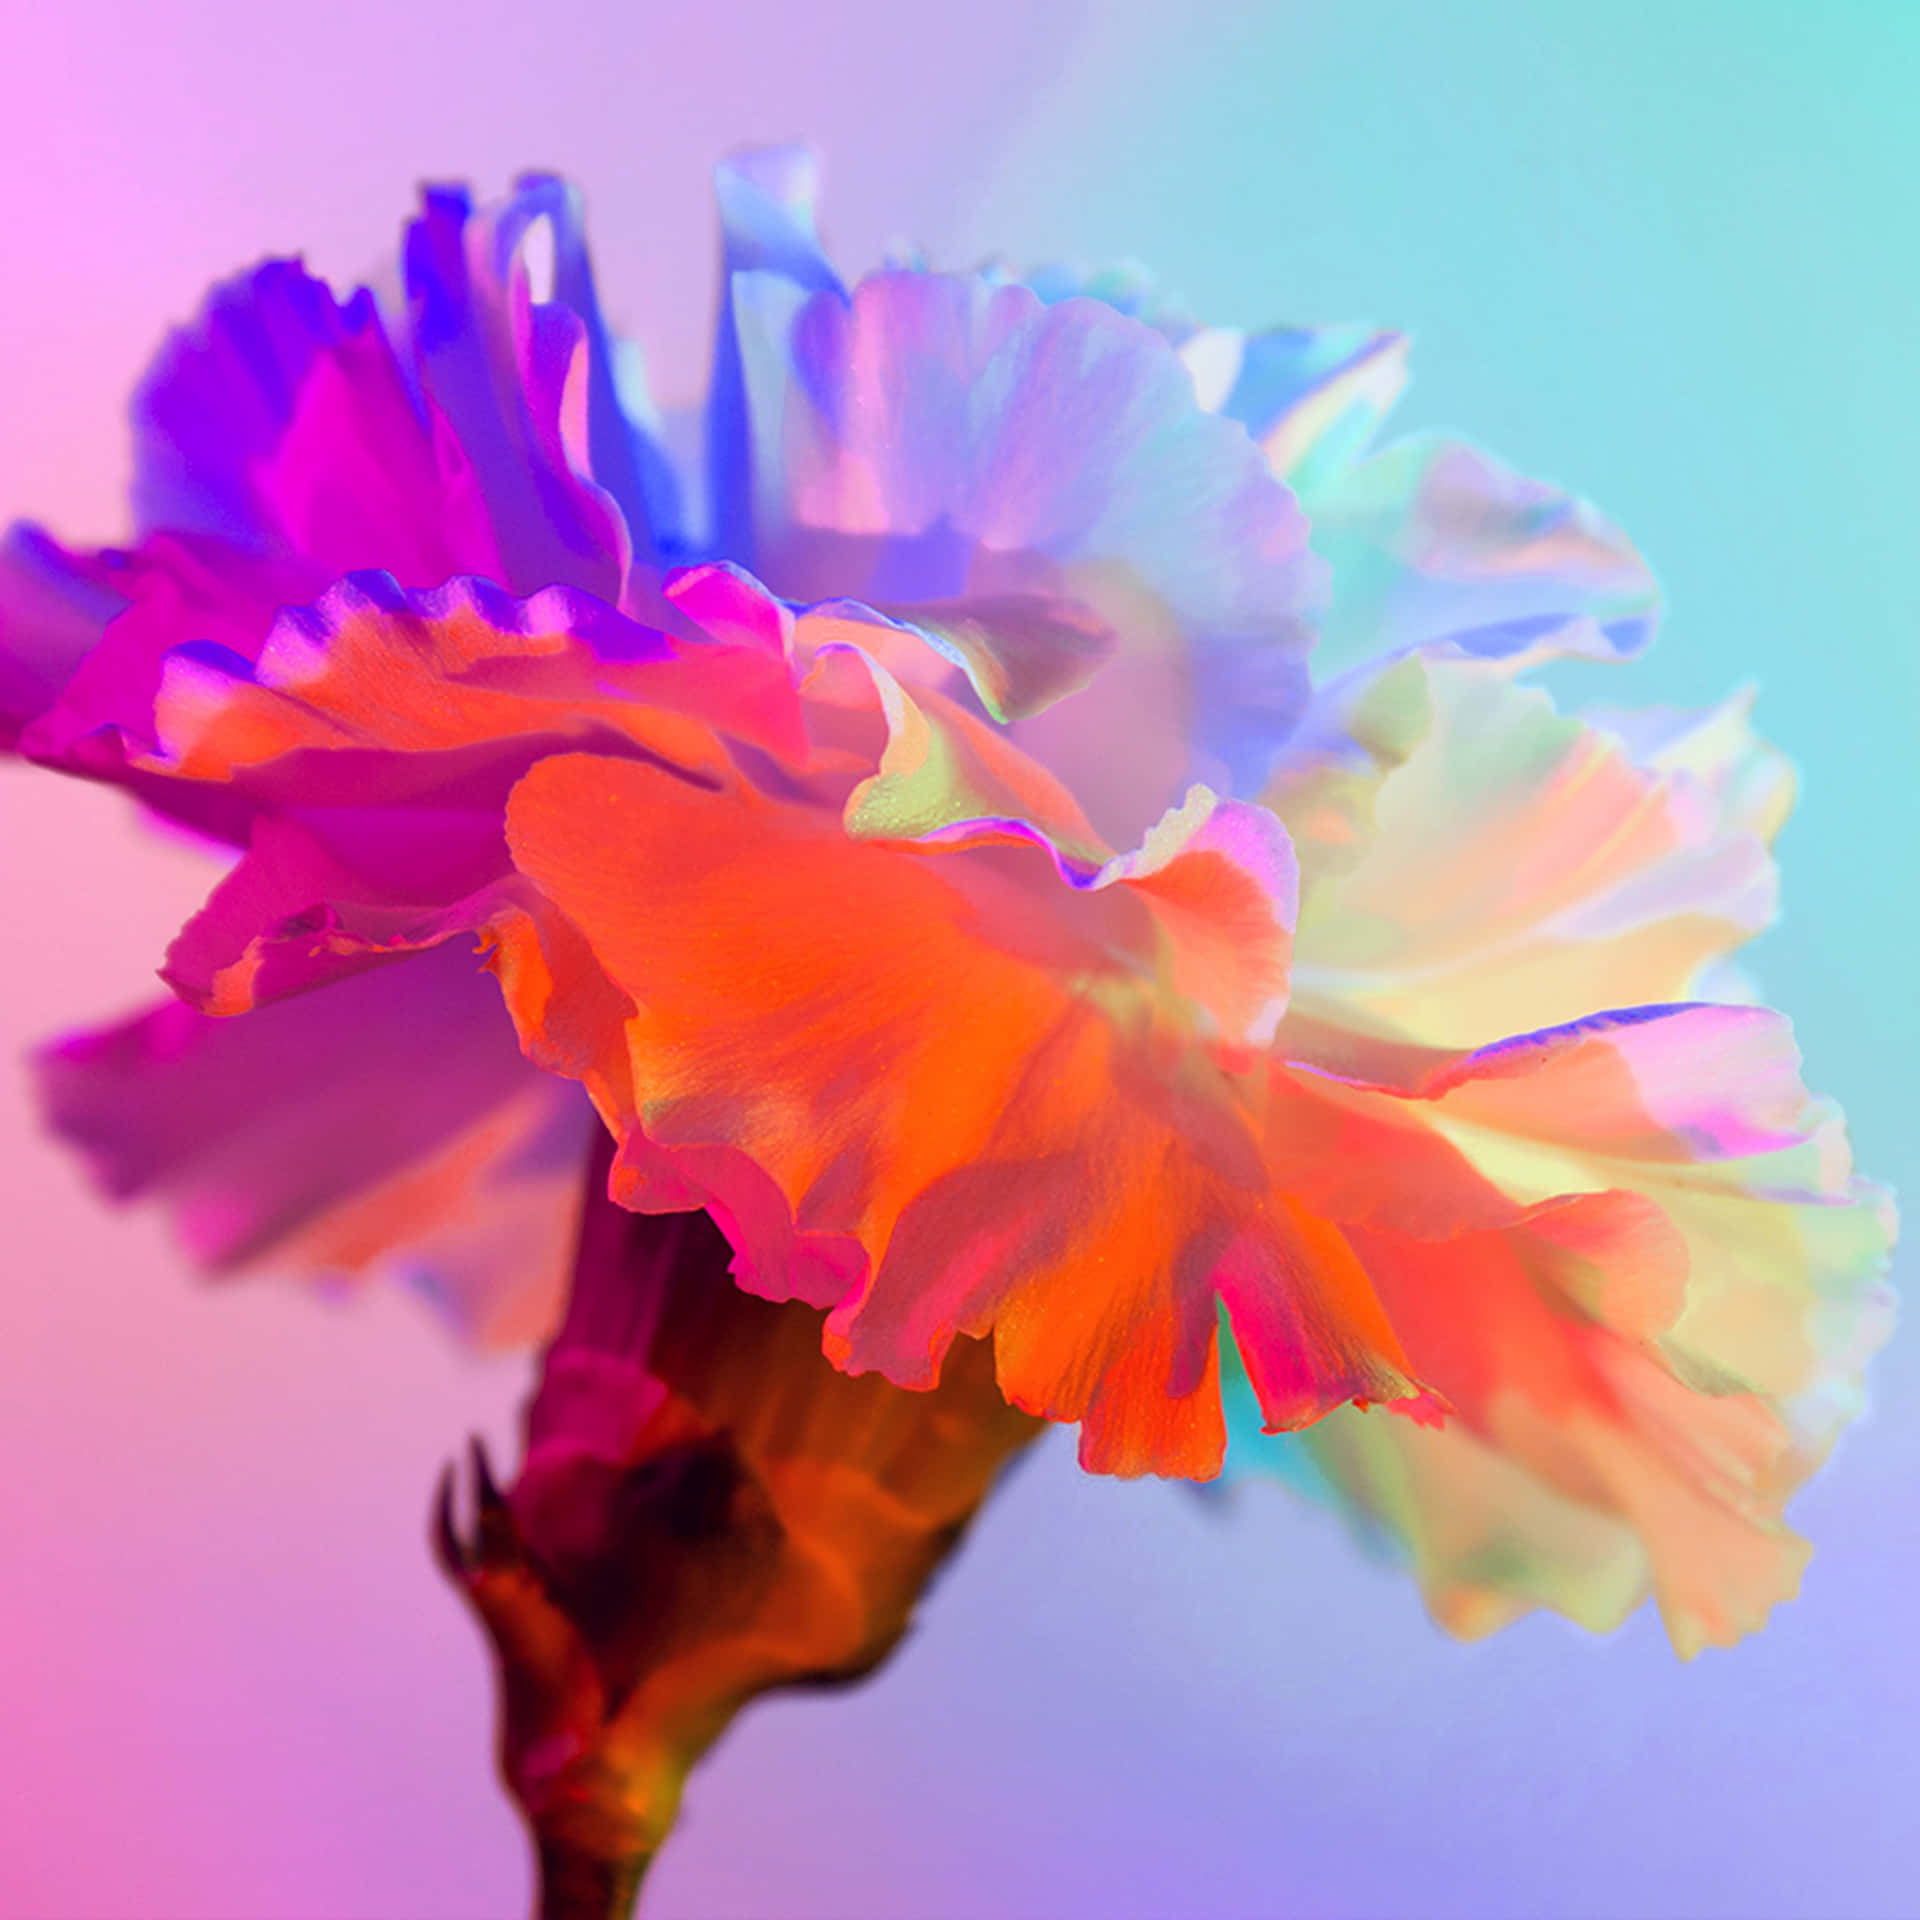 A Colorful Flower With A Colorful Background Wallpaper